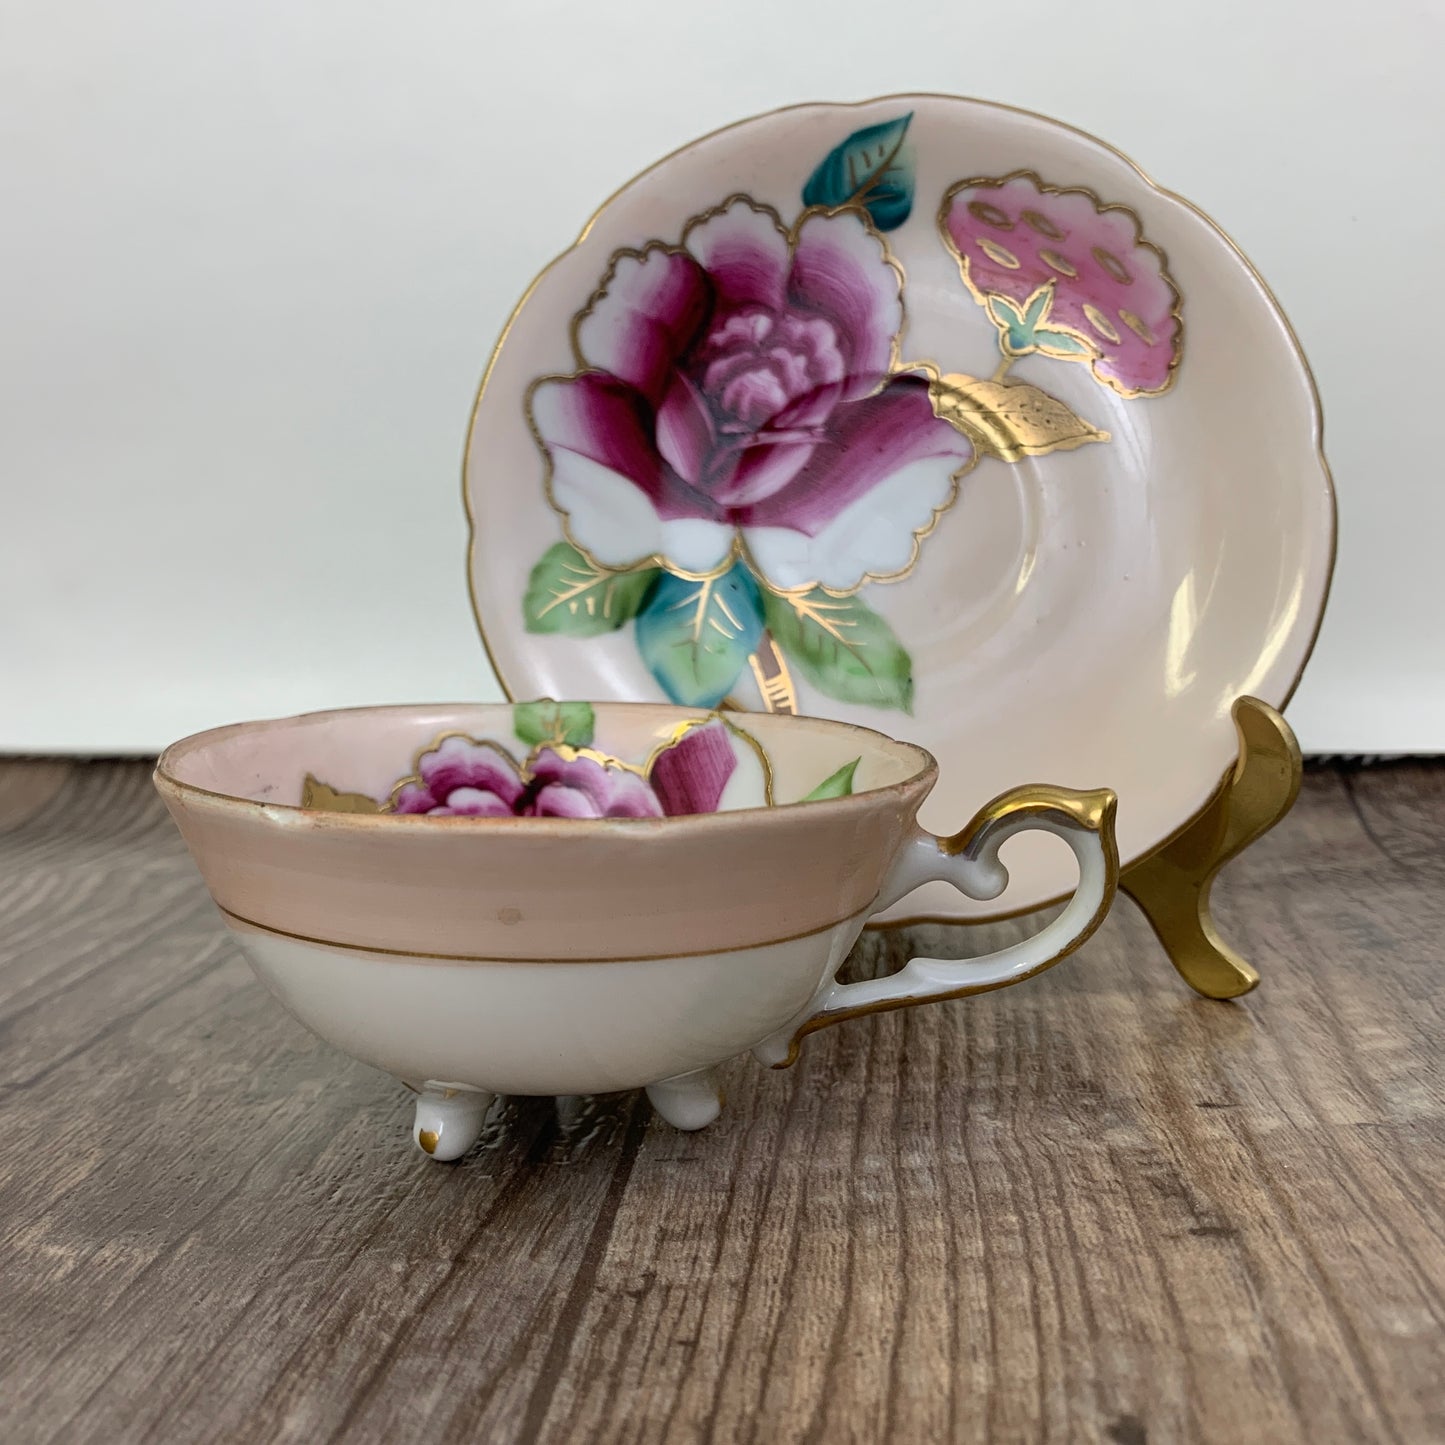 Trimont China Hand Painted Demi Tasse Cup Hand Painted Teacup and Saucer Hand Painted Pink Teacup